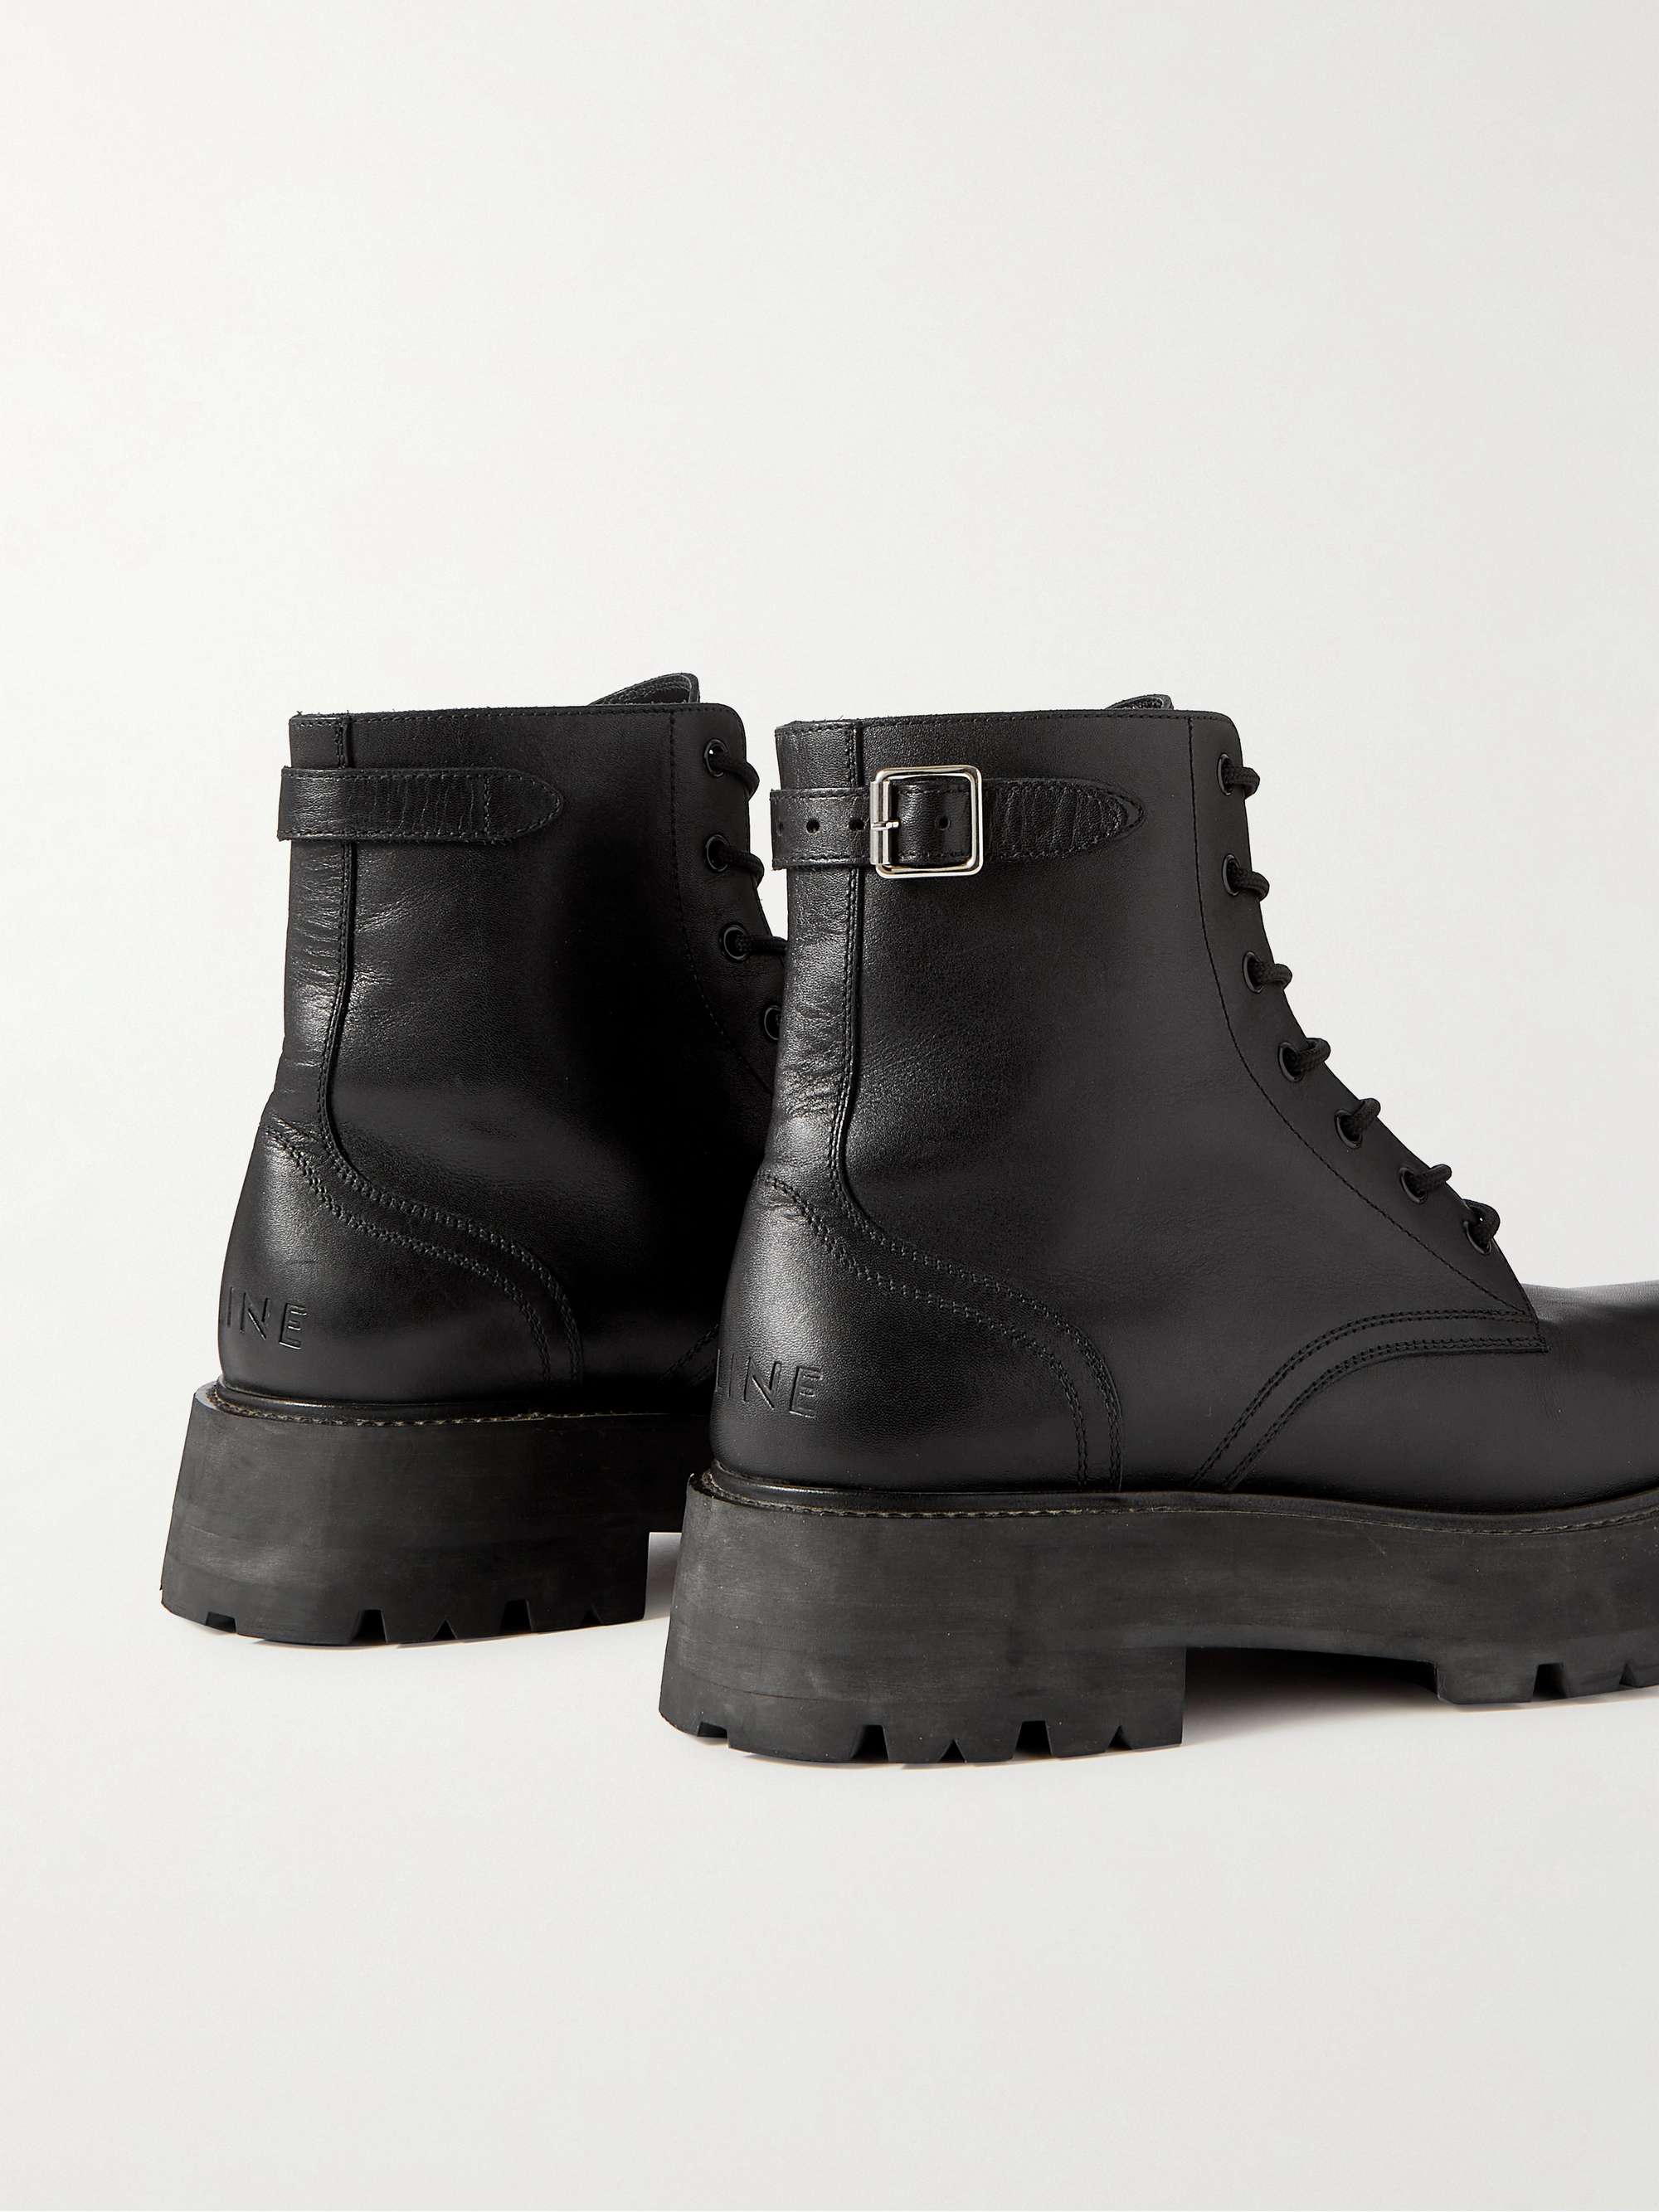 Ranger Studded Leather Boots